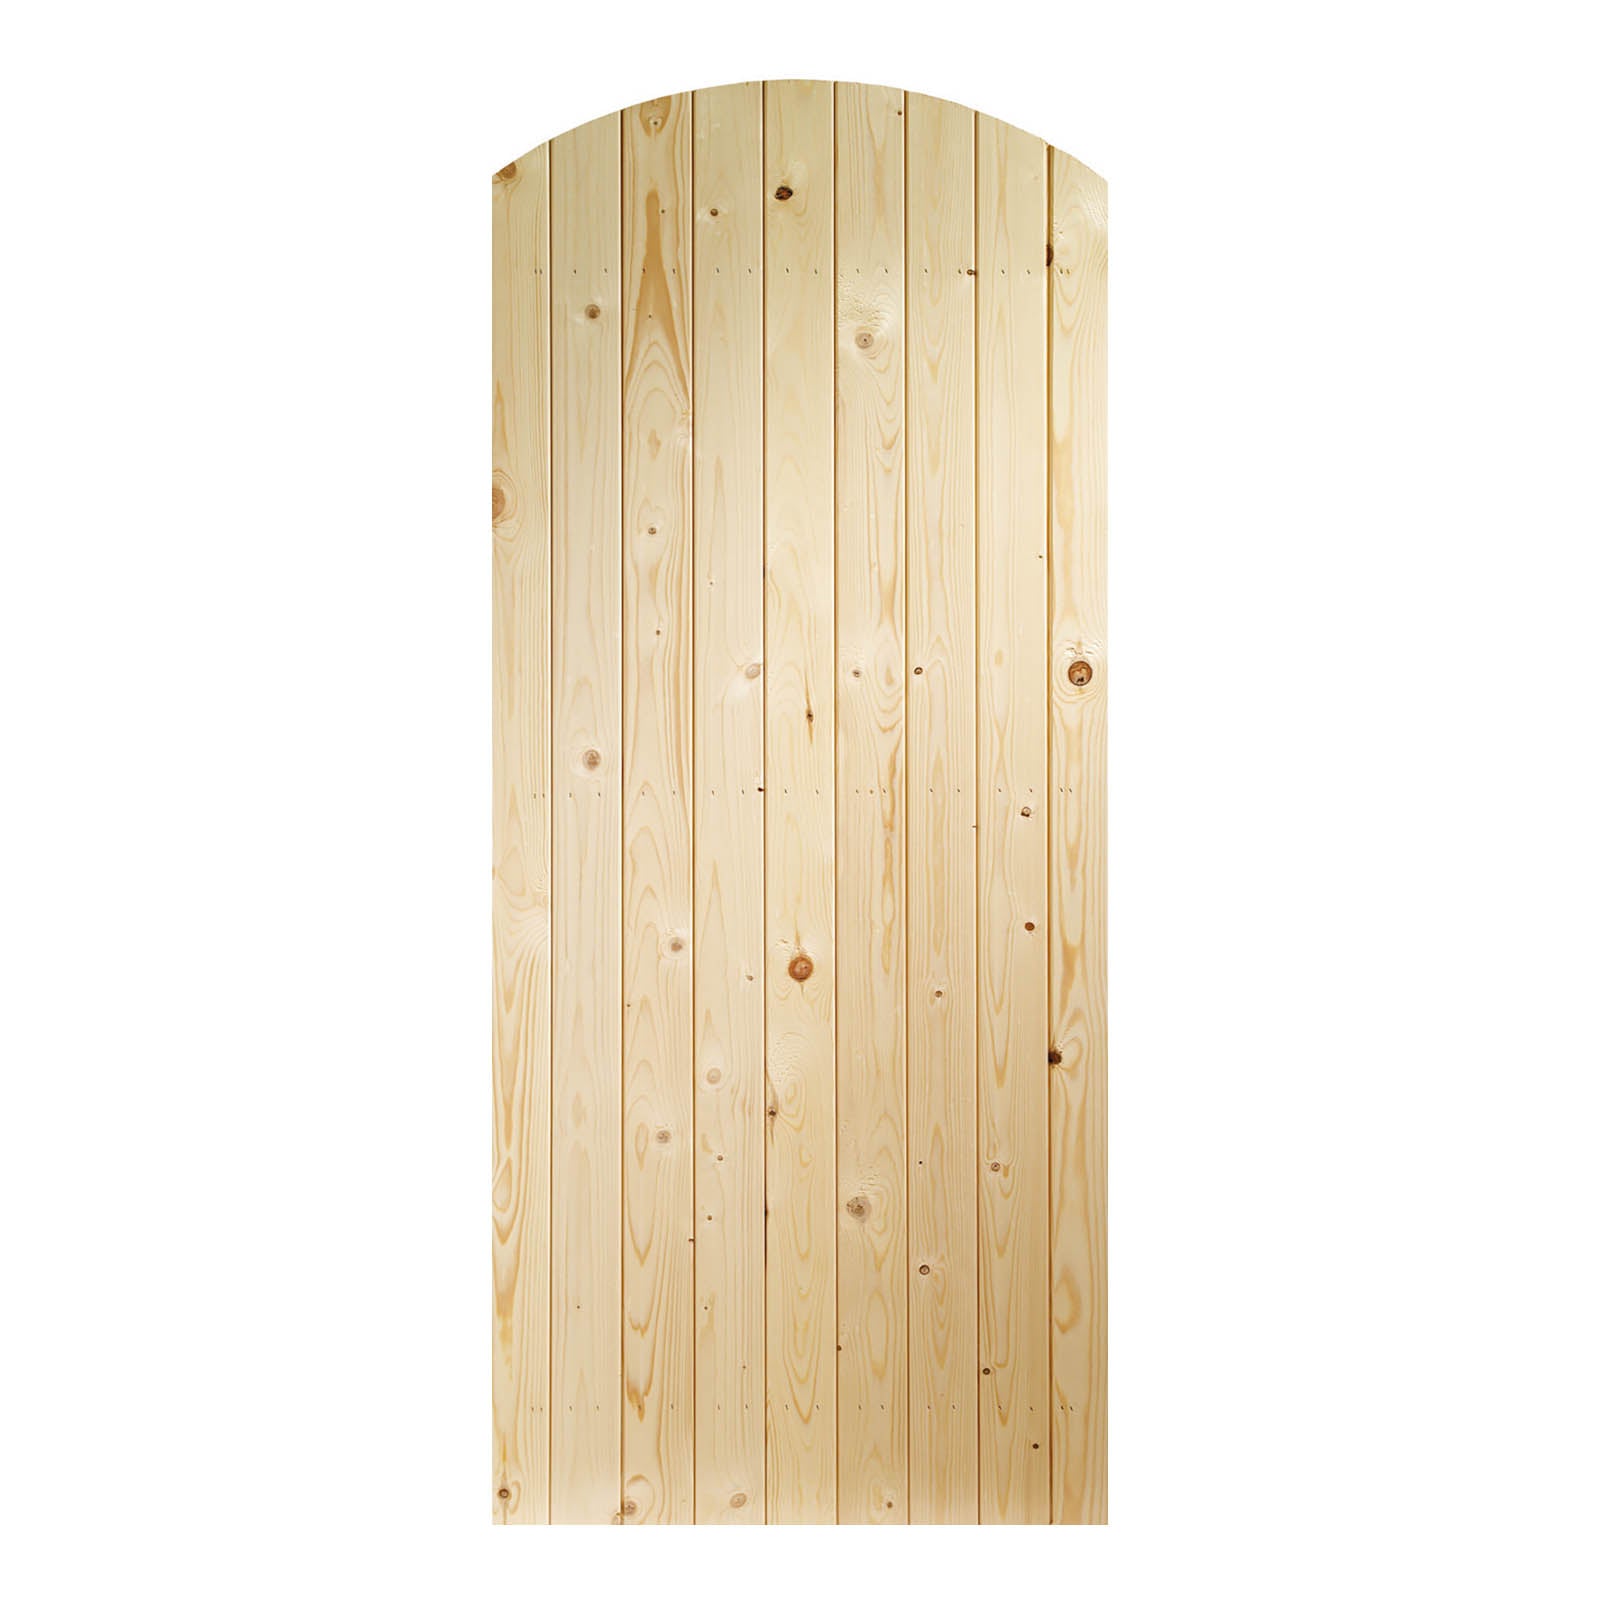 External Pine Ledged & Braced Arched Top Gate